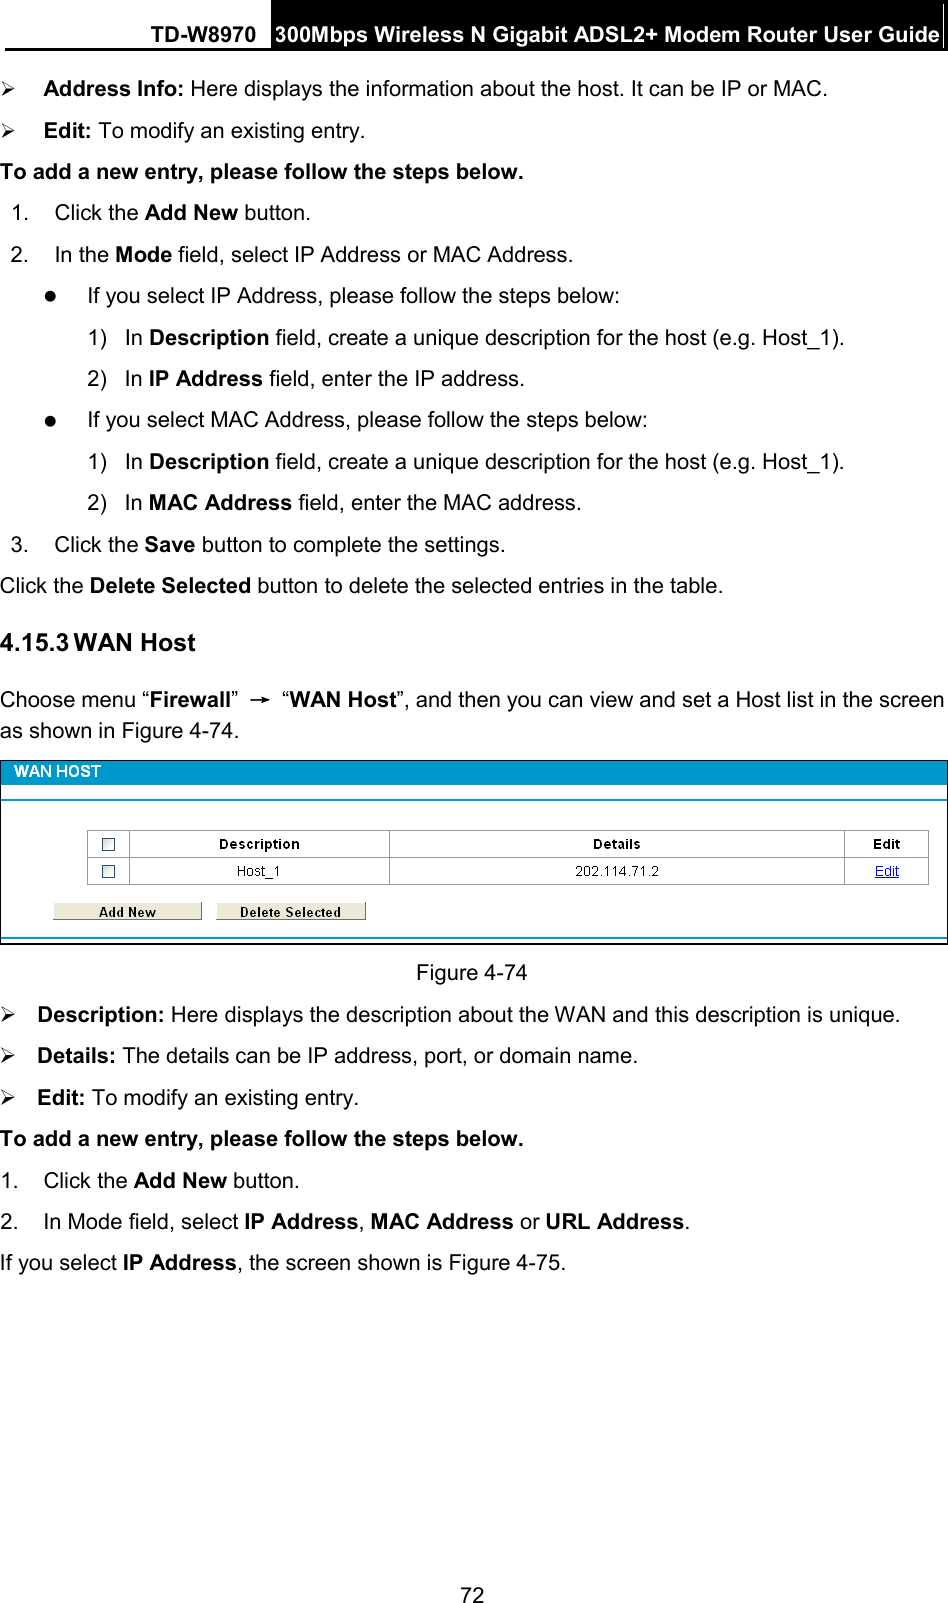 TD-W8970 300Mbps Wireless N Gigabit ADSL2+ Modem Router User Guide   Address Info: Here displays the information about the host. It can be IP or MAC.    Edit: To modify an existing entry.   To add a new entry, please follow the steps below. 1.  Click the Add New button. 2. In the Mode field, select IP Address or MAC Address.  If you select IP Address, please follow the steps below:   1) In Description field, create a unique description for the host (e.g. Host_1).   2) In IP Address field, enter the IP address.  If you select MAC Address, please follow the steps below:   1) In Description field, create a unique description for the host (e.g. Host_1). 2)  In MAC Address field, enter the MAC address. 3. Click the Save button to complete the settings. Click the Delete Selected button to delete the selected entries in the table. 4.15.3 WAN Host Choose menu “Firewall” → “WAN Host”, and then you can view and set a Host list in the screen as shown in Figure 4-74.  Figure 4-74  Description: Here displays the description about the WAN and this description is unique.    Details: The details can be IP address, port, or domain name.    Edit: To modify an existing entry.   To add a new entry, please follow the steps below. 1.  Click the Add New button. 2. In Mode field, select IP Address, MAC Address or URL Address. If you select IP Address, the screen shown is Figure 4-75.  72 